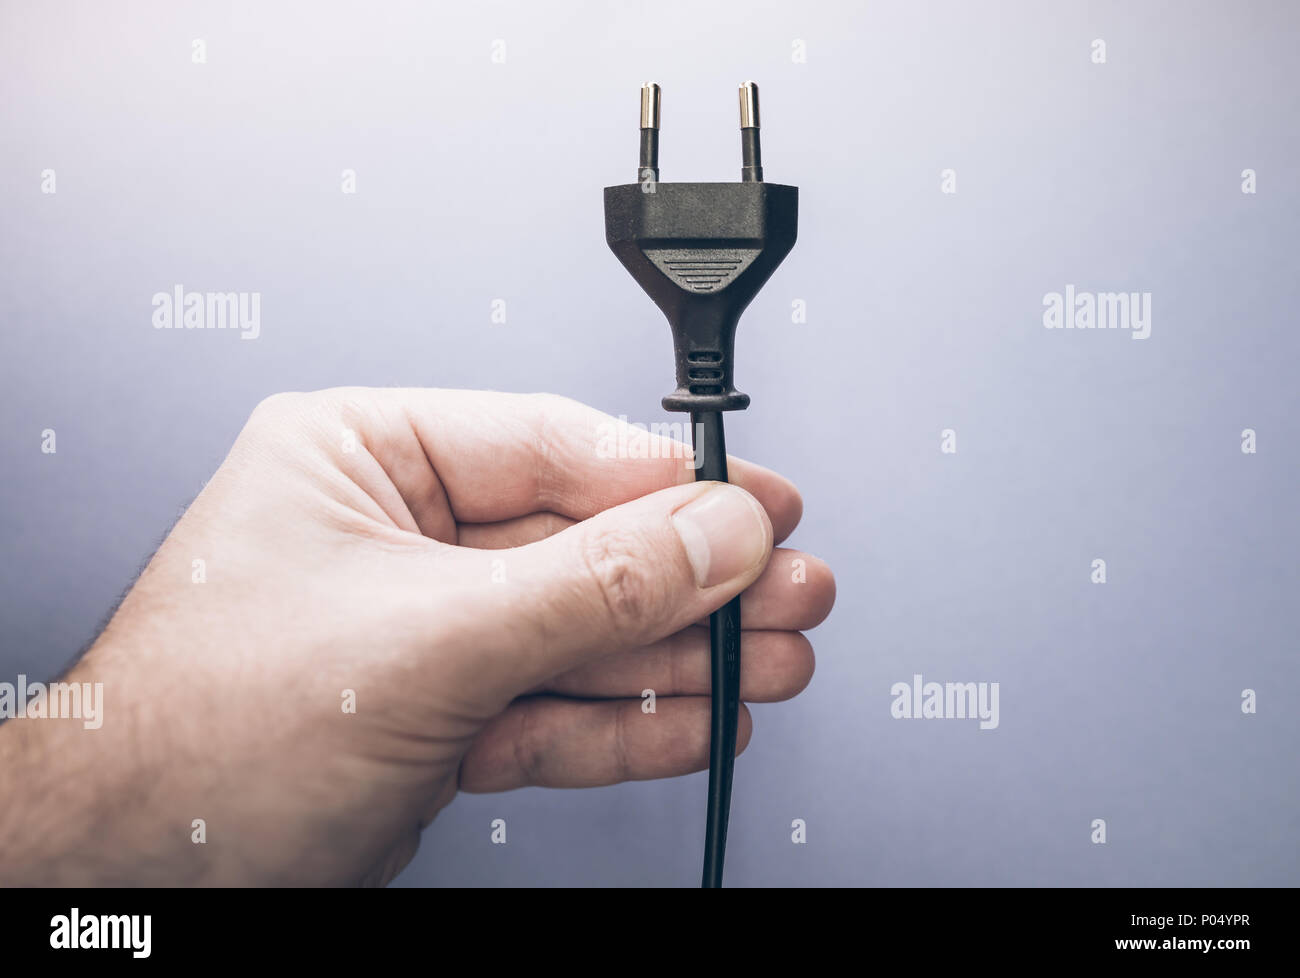 male hand holding electric plug Stock Photo